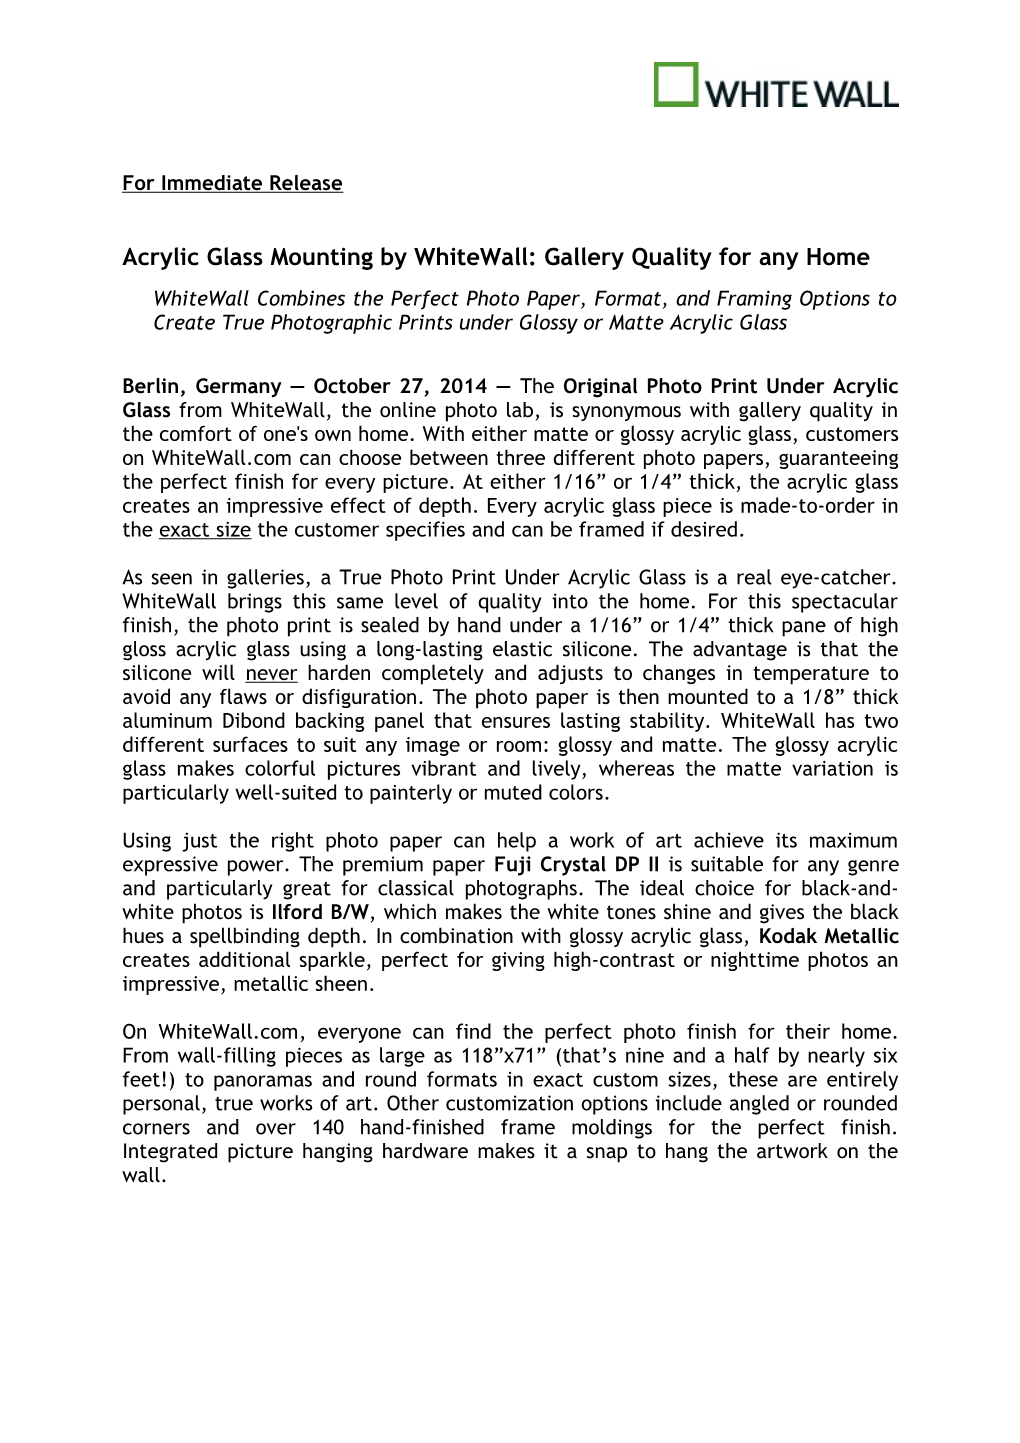 Acrylic Glass Mounting by Whitewall: Gallery Quality for Any Home